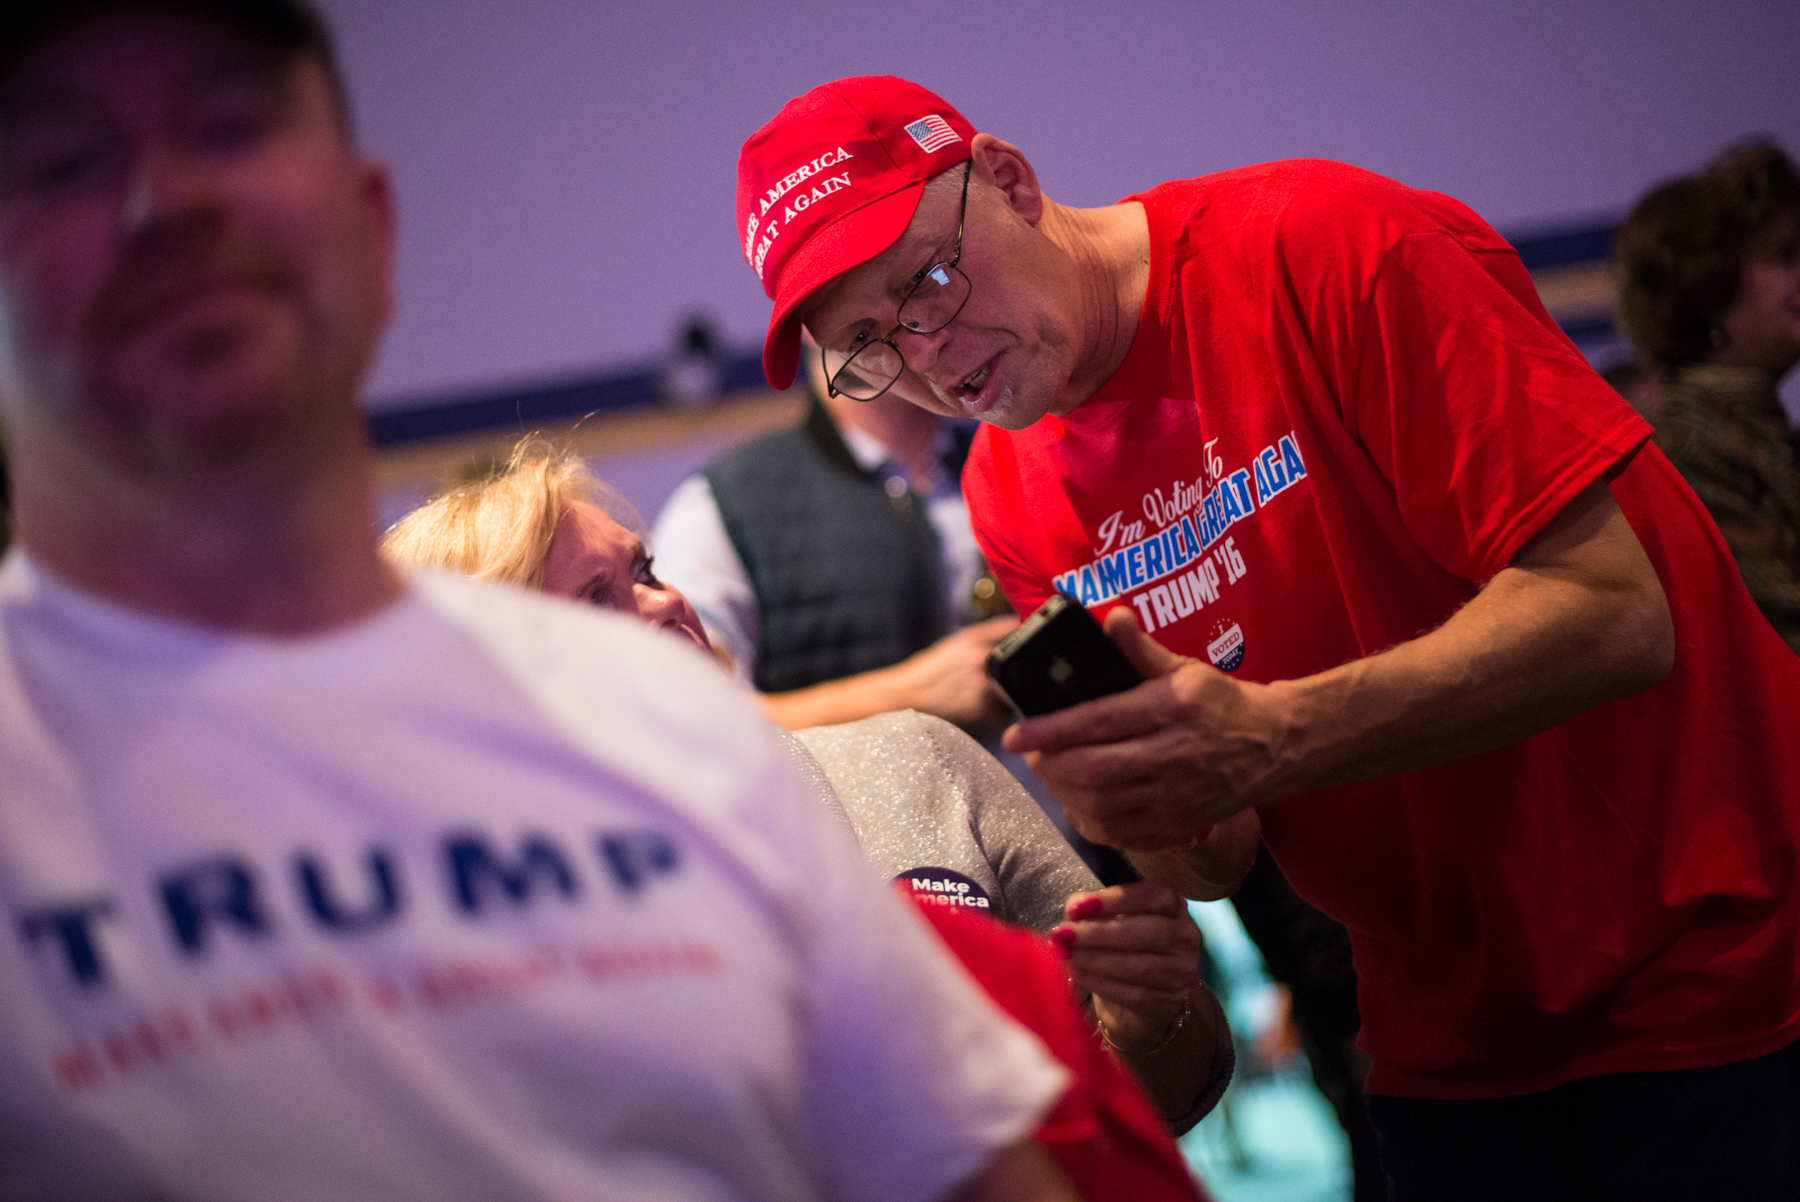 Braintree, MA – Nov. 8, 2016 – Ray Bourbeau, of Chicopee, Massachusetts, reads the latest victory prediction for United States presidential candidate Donald Trump on his phone during the Massachusetts Trump-Pence Campaign victory party. Trump supporters gathered at the F1 Boston race track to cheer on their nominee as he was elected 45th president of the United States.